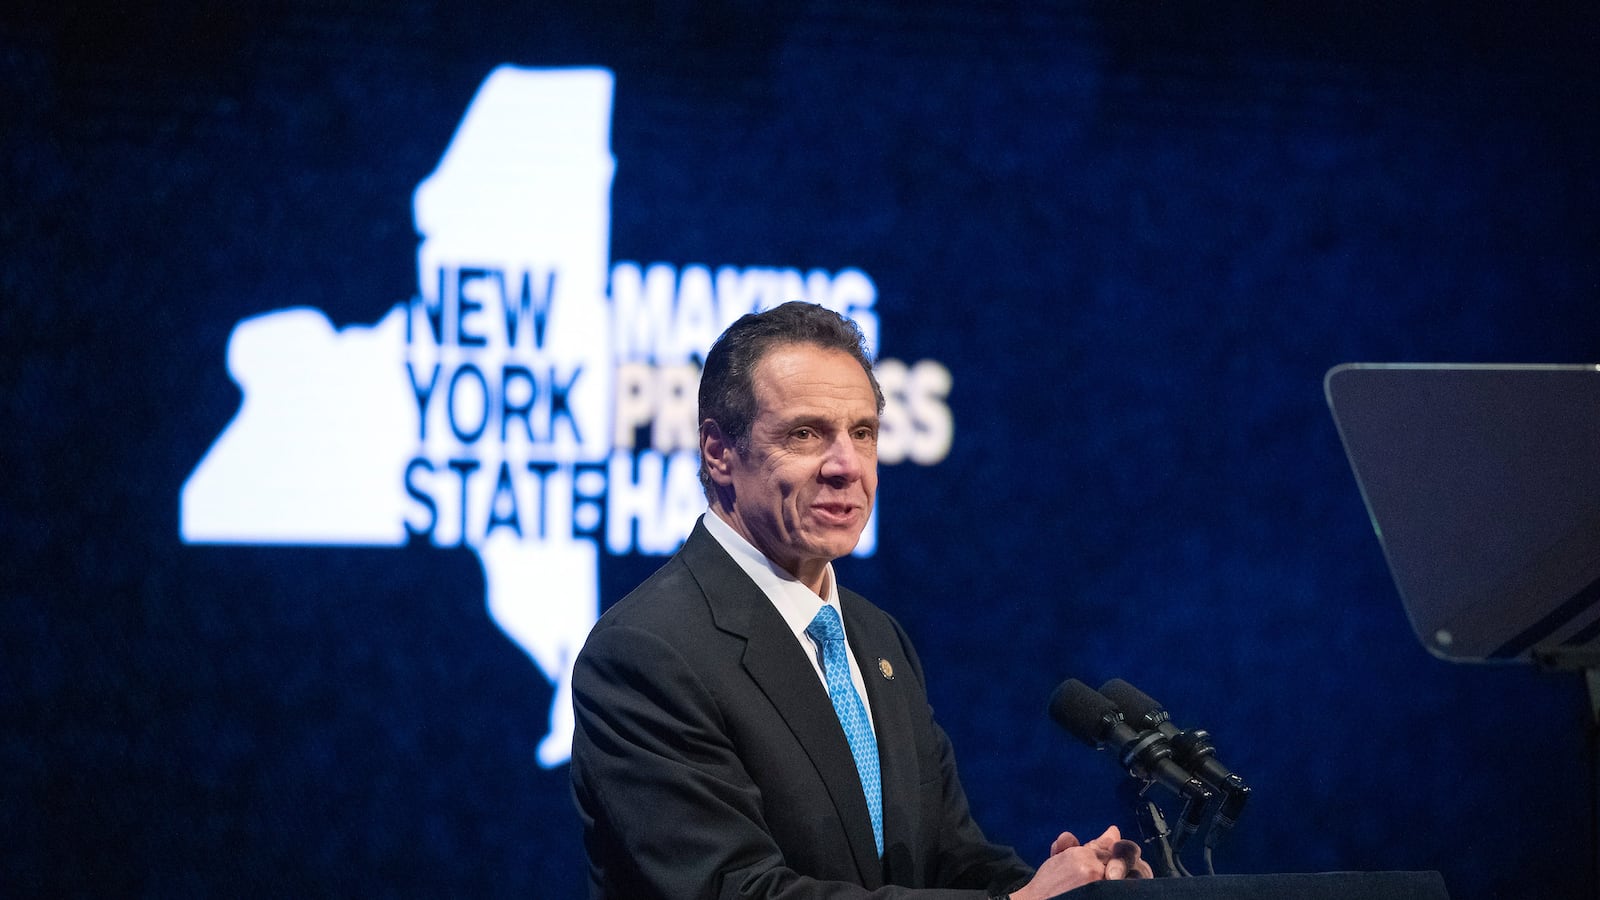 Andrew Cuomo delivers his 2020 State of the State Address in Albany.